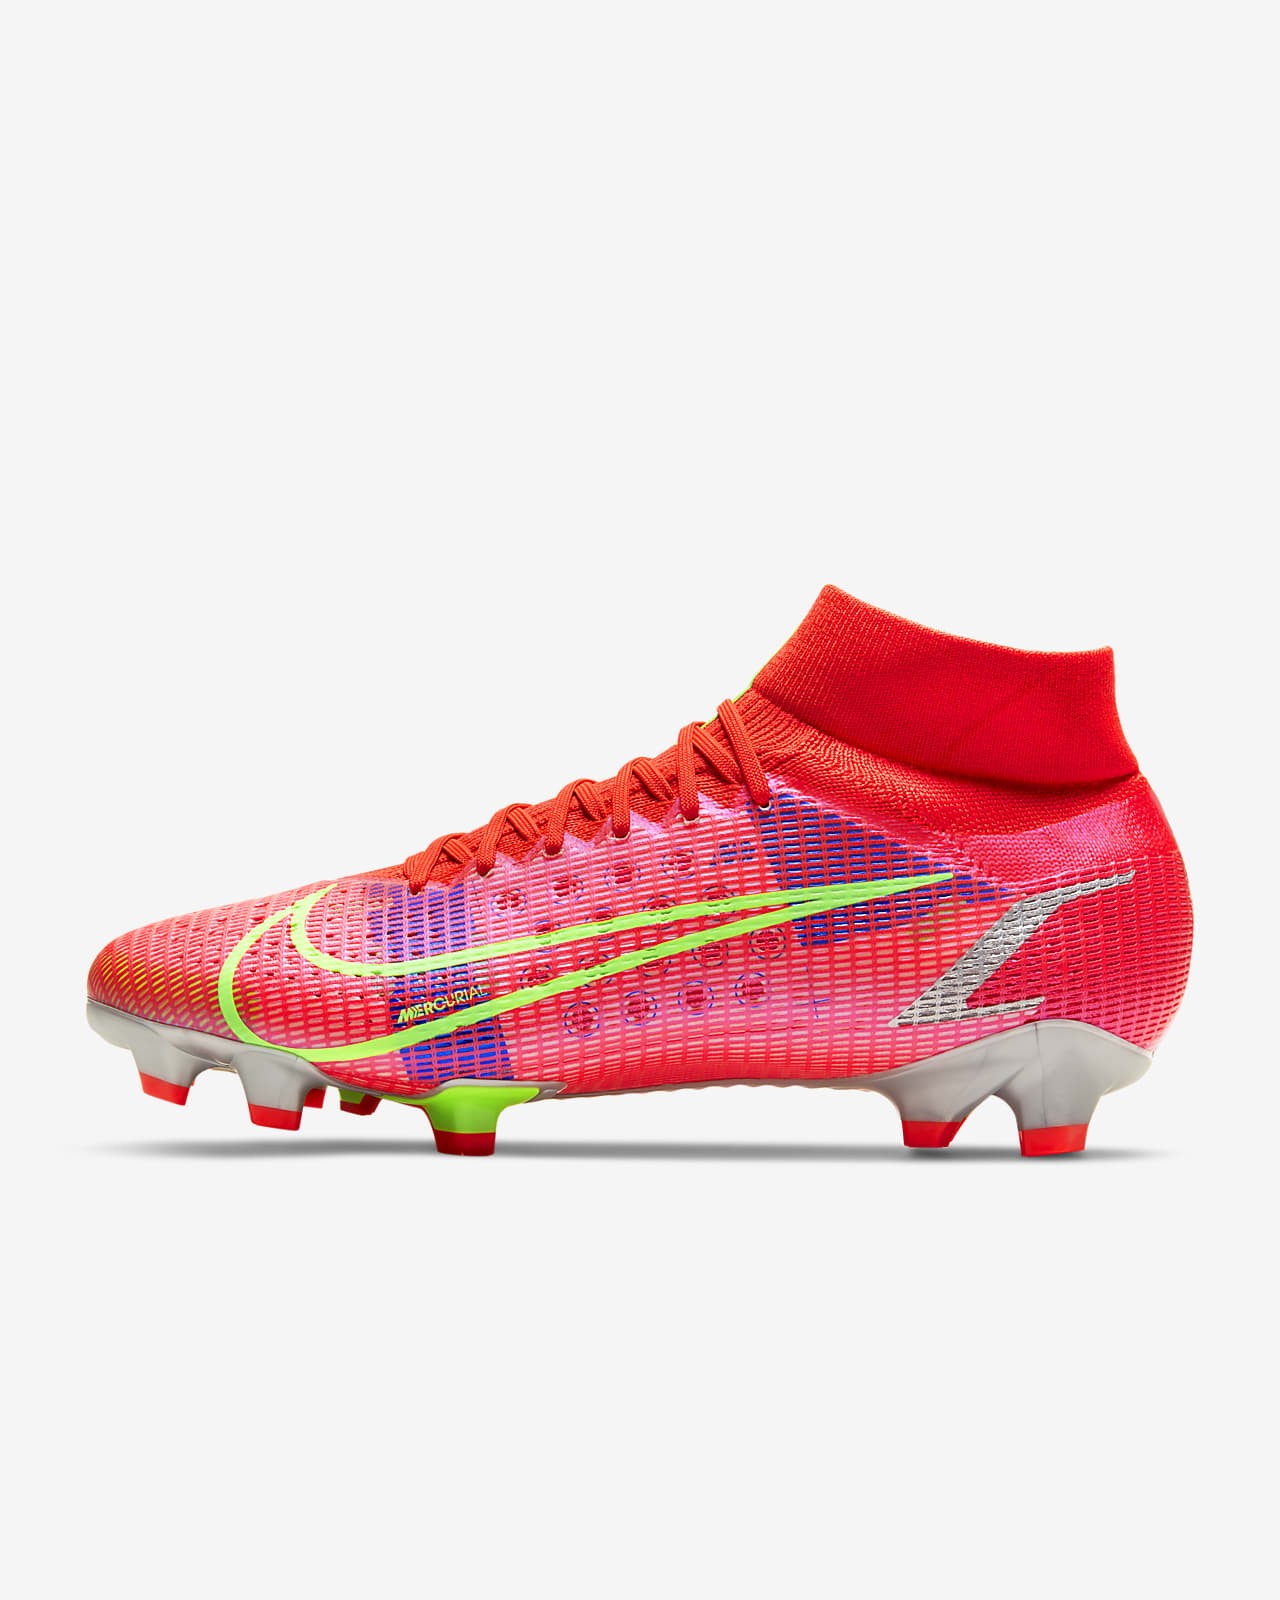 soccer shoes cleats nike